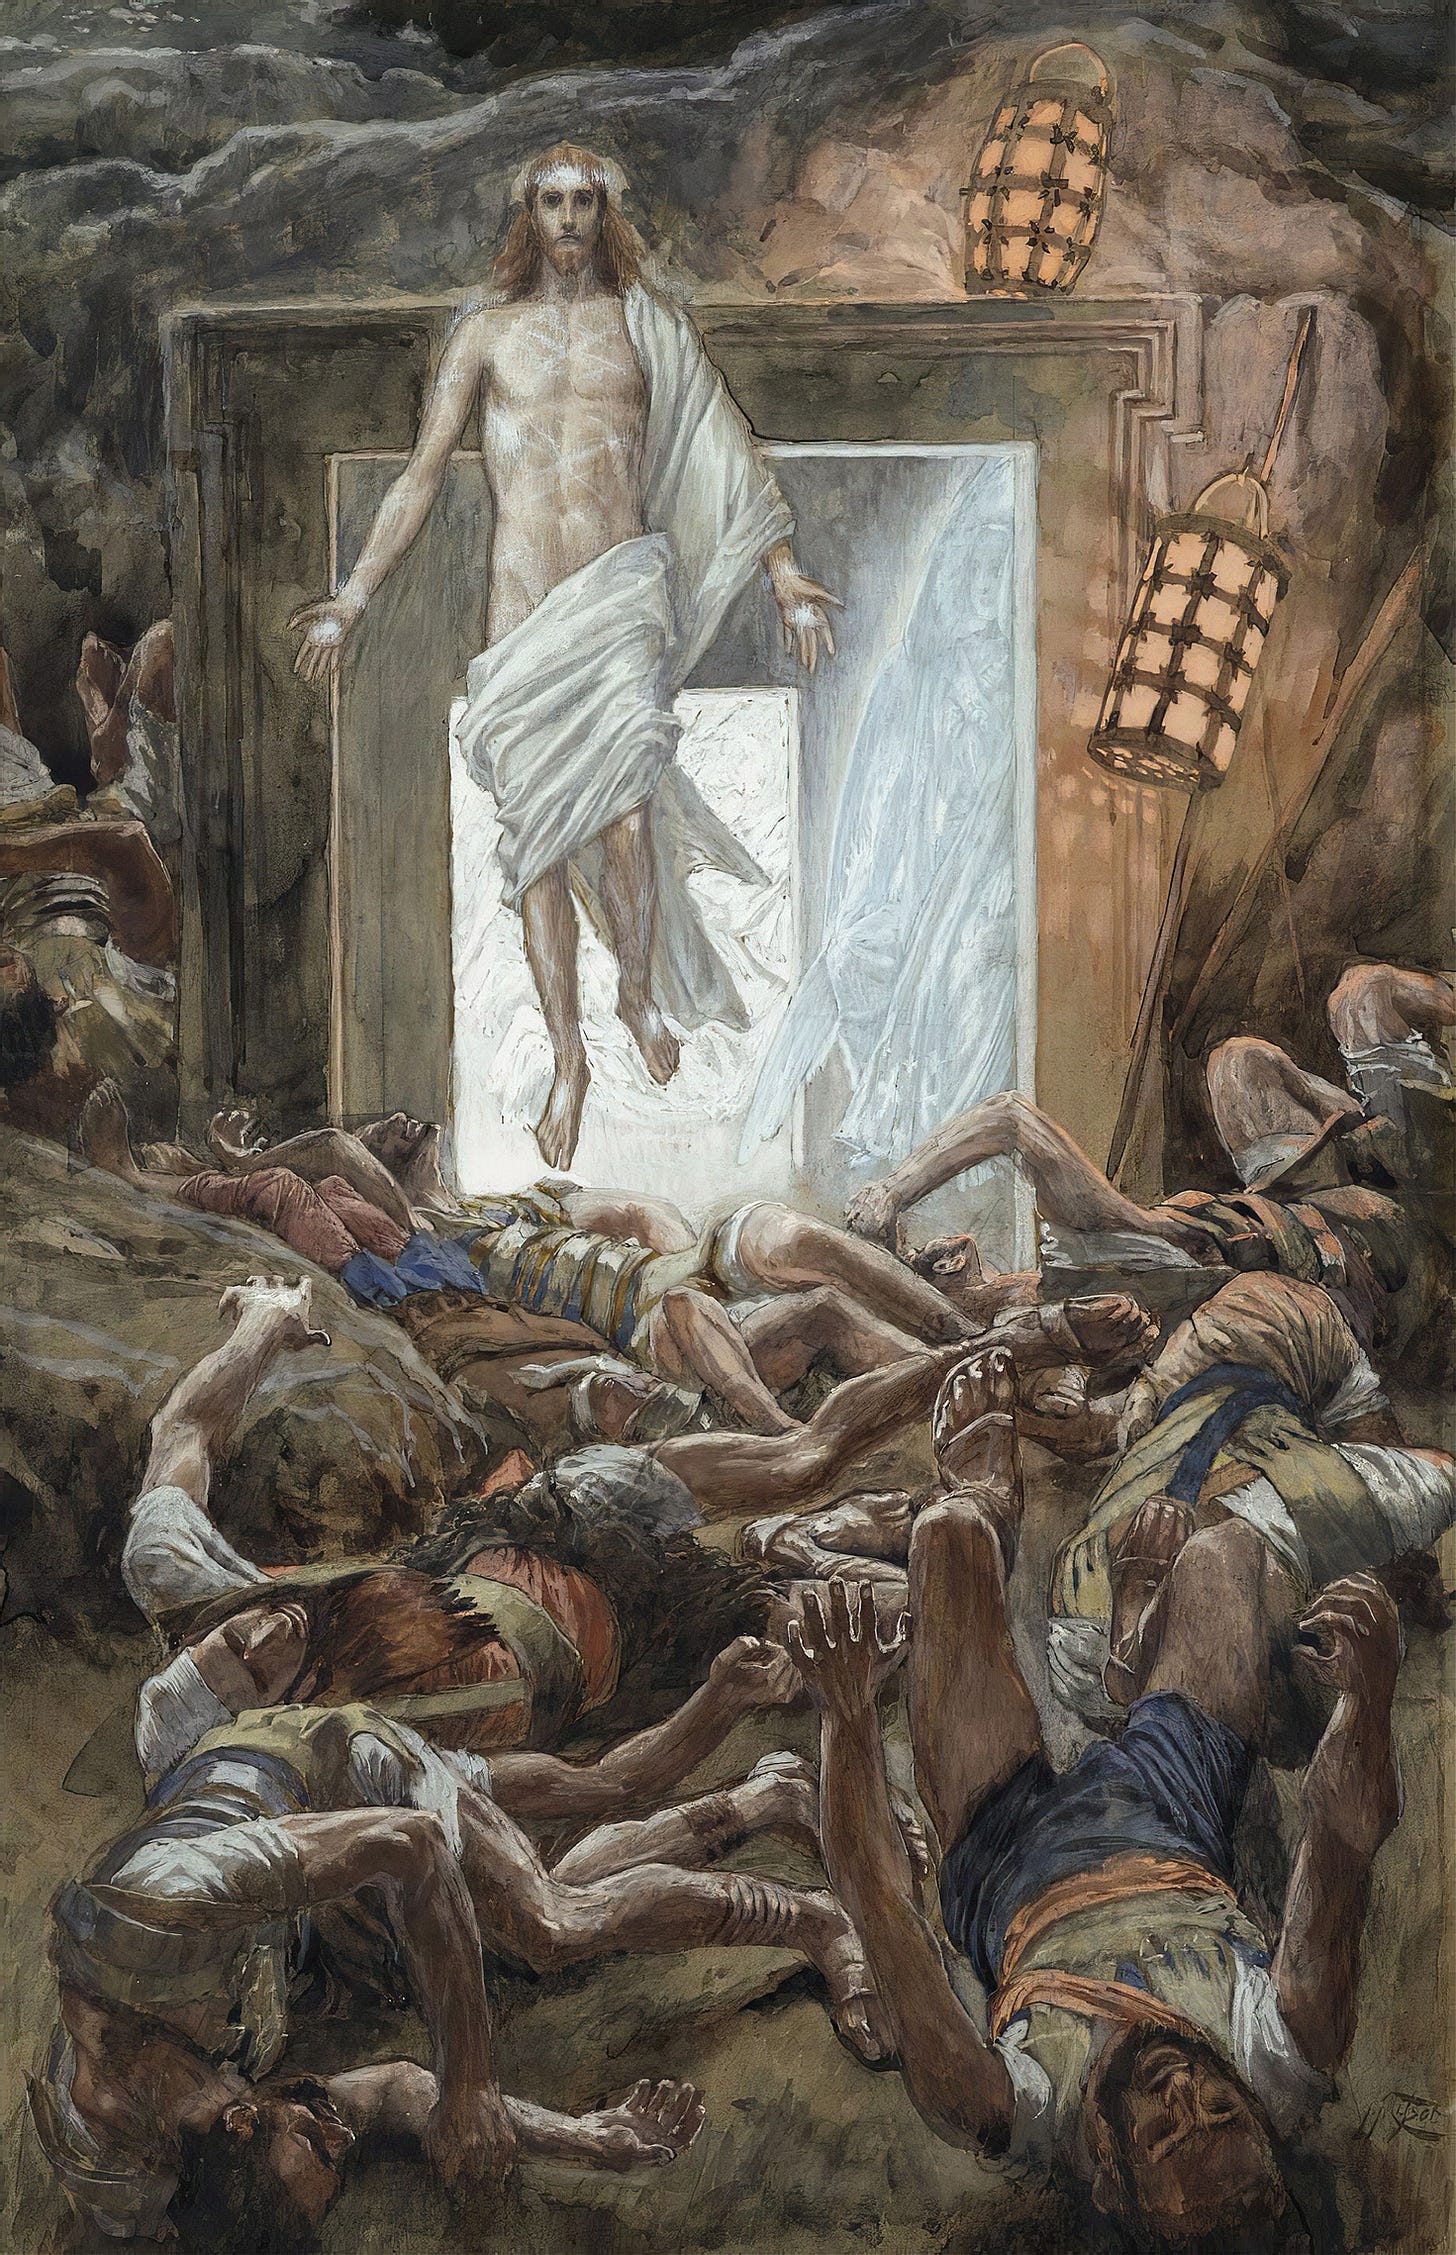 The Resurrection (1886-1894) by James Tissot